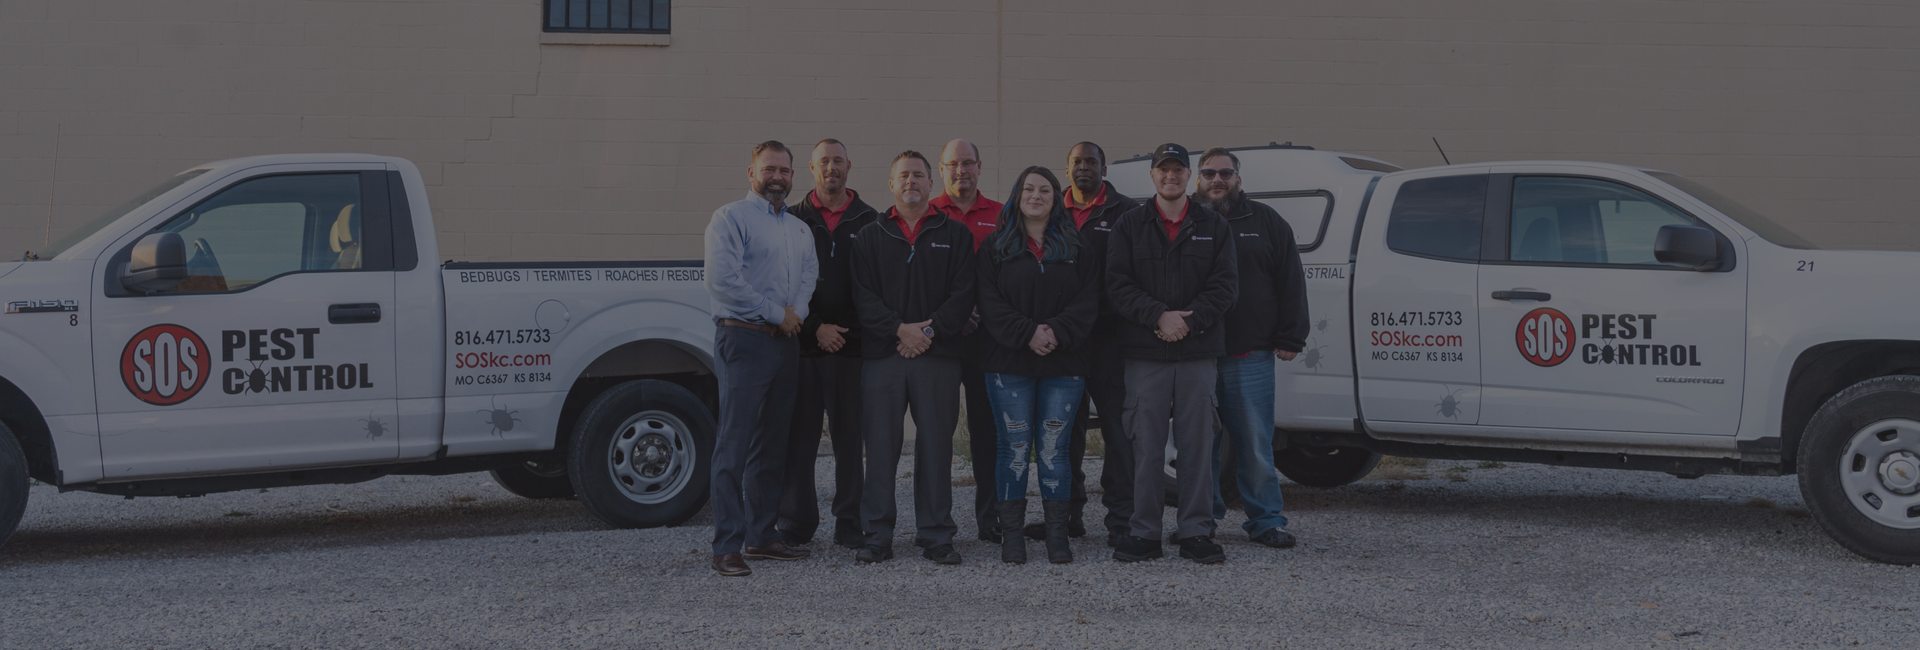 SOS Pest Control technicians and team of Kansas City are posing as a group by the building. They can exterminate bedbugs and termites from your business or home.